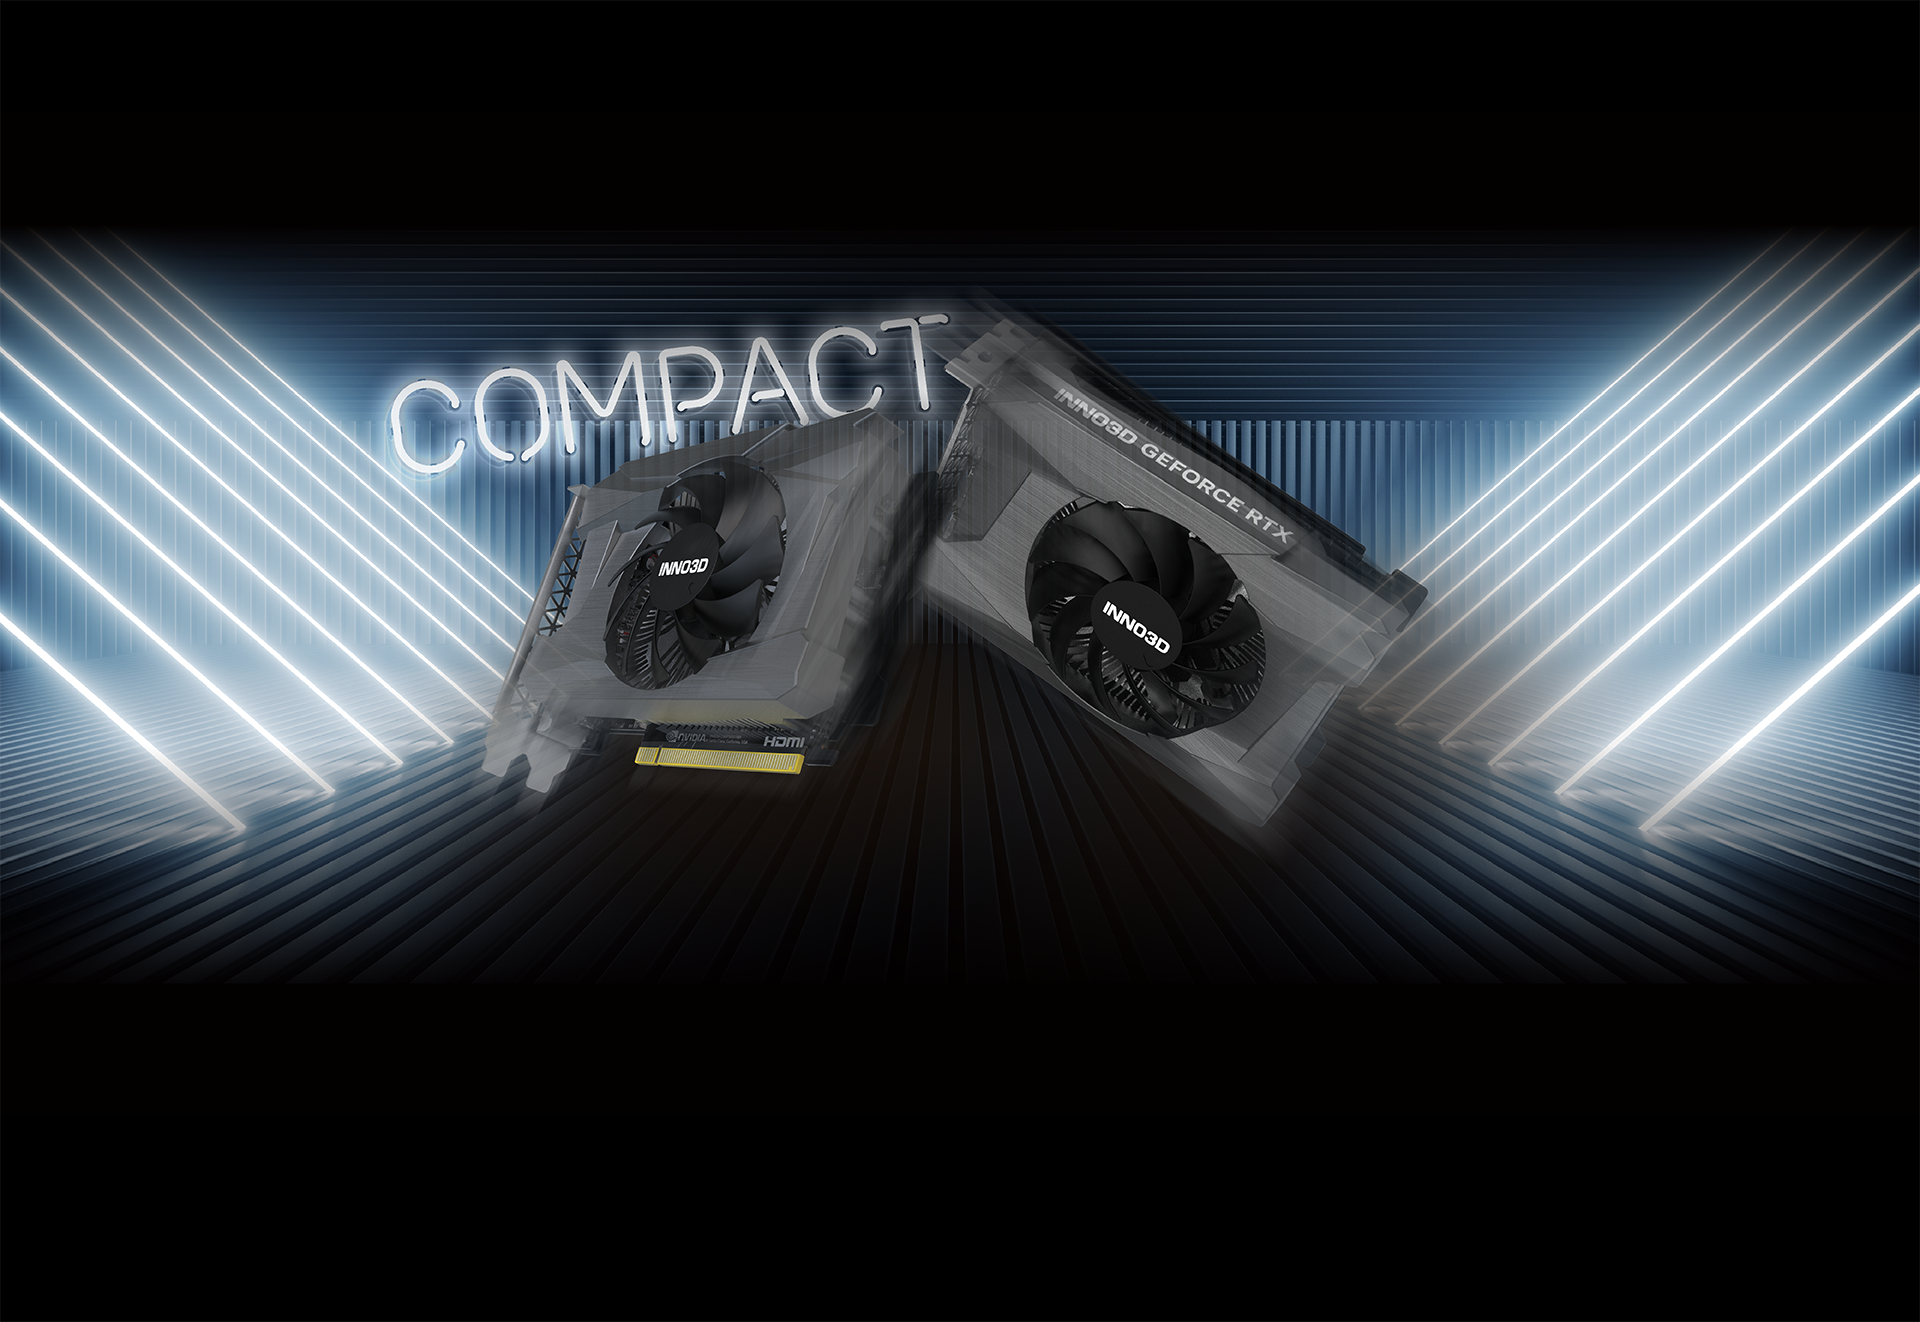 LP_4060_COMPACT_banner_1920x1322.png